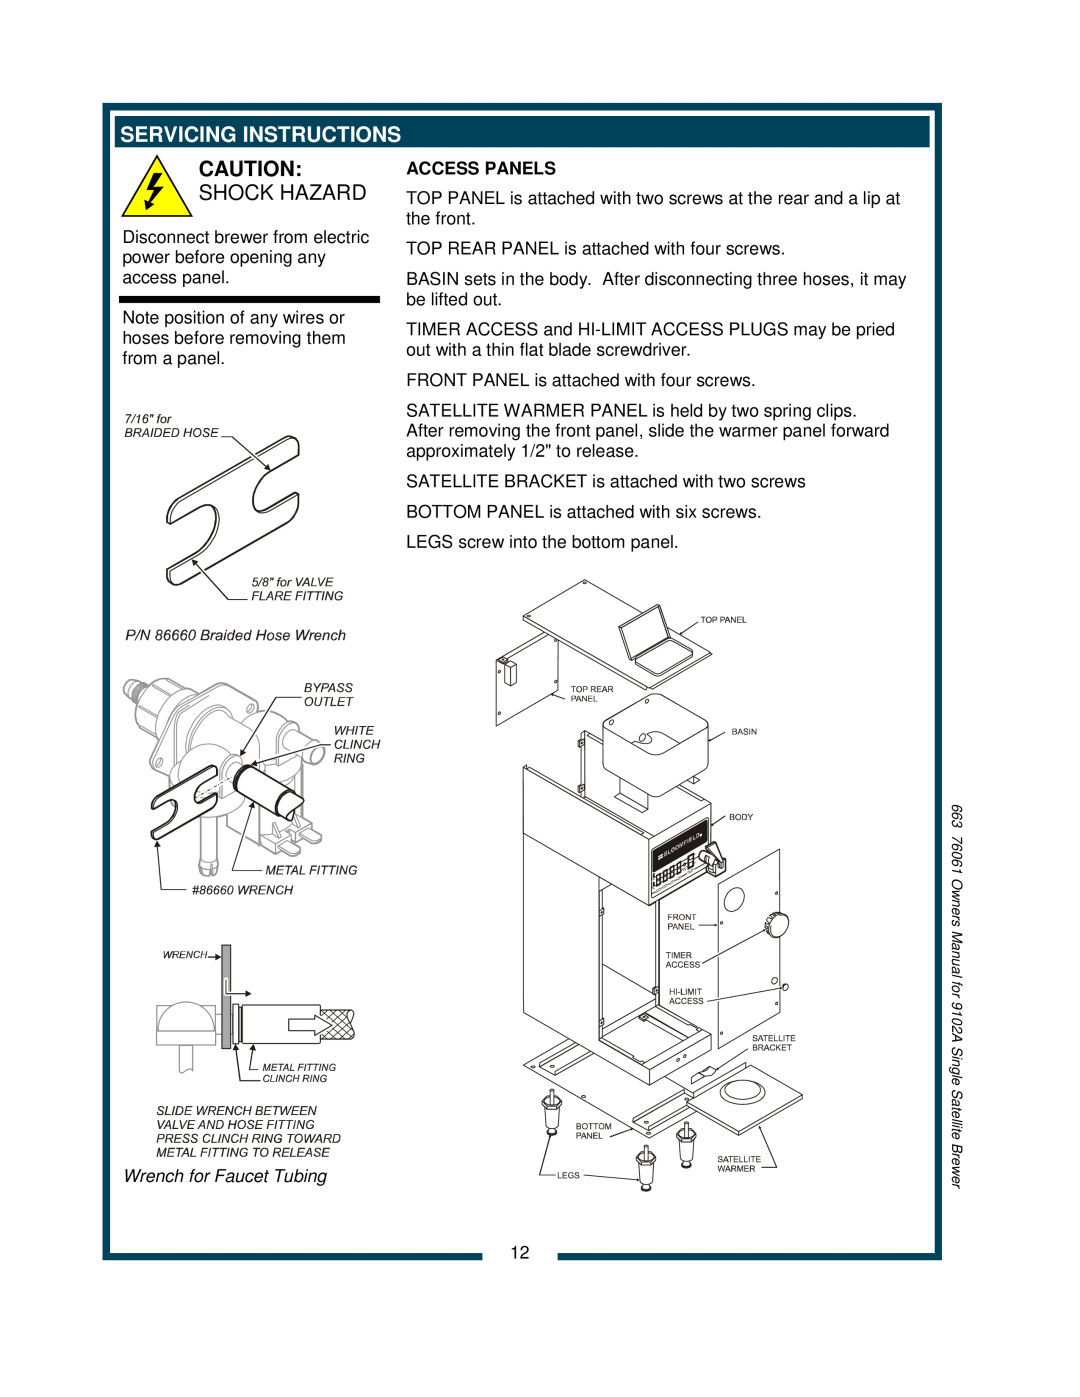 Bloomfield 9102A, 9104A owner manual Servicing Instructions, Shock Hazard, Access Panels 